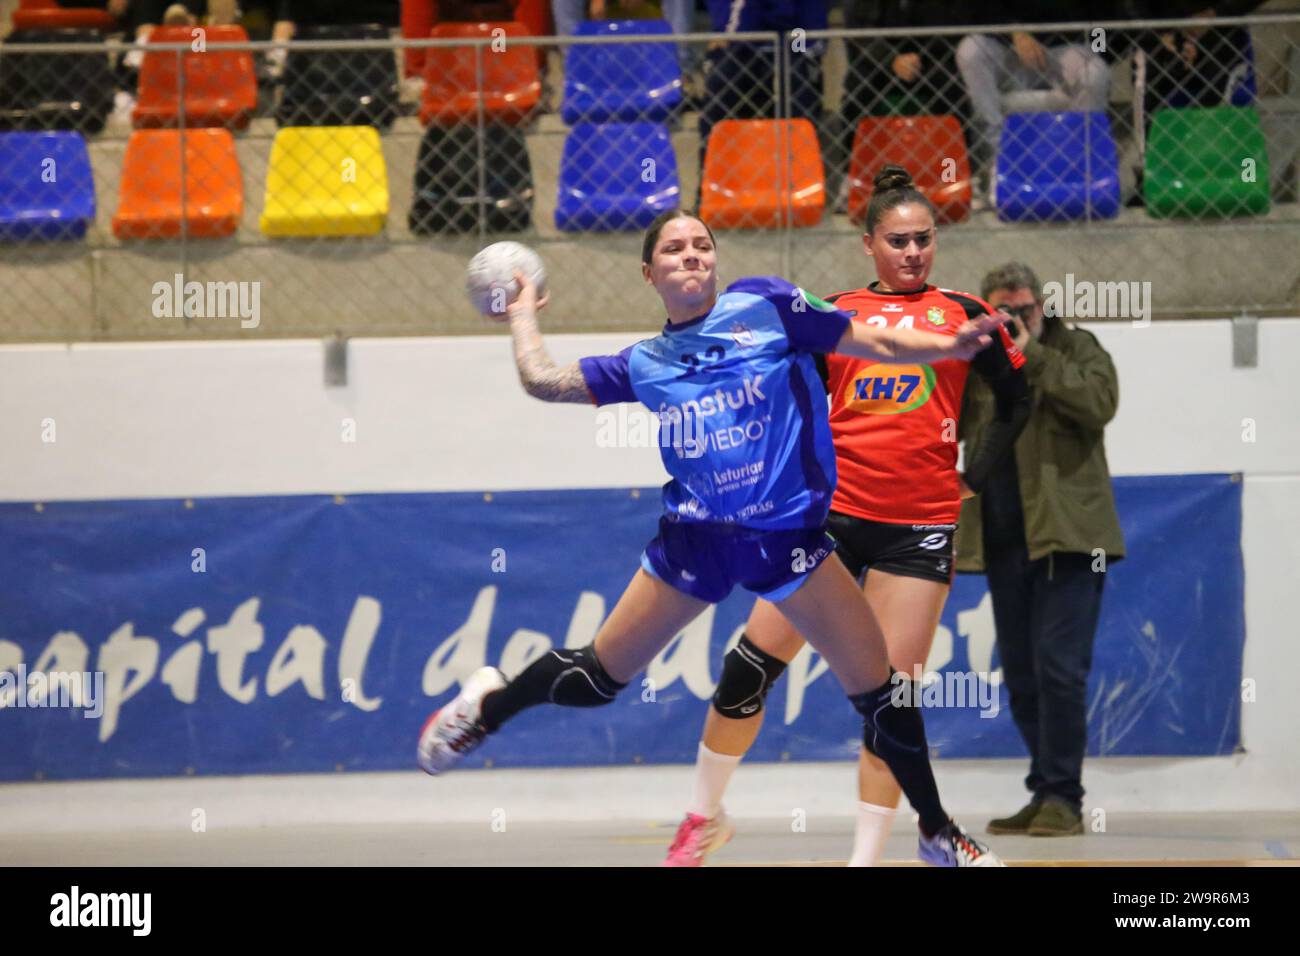 Oviedo, Spain, 29th December, 2023: Lobas Global Atac Oviedo player, Camila Belen (22) shoots on goal during the 13th Matchday of the Liga Guerreras Iberdrola between Lobas Global Atac Oviedo and KH-7 BM. Granollers, on December 29, 2023, at the Florida Arena Municipal Sports Center, in Oviedo, Spain. Credit: Alberto Brevers / Alamy Live News. Stock Photo